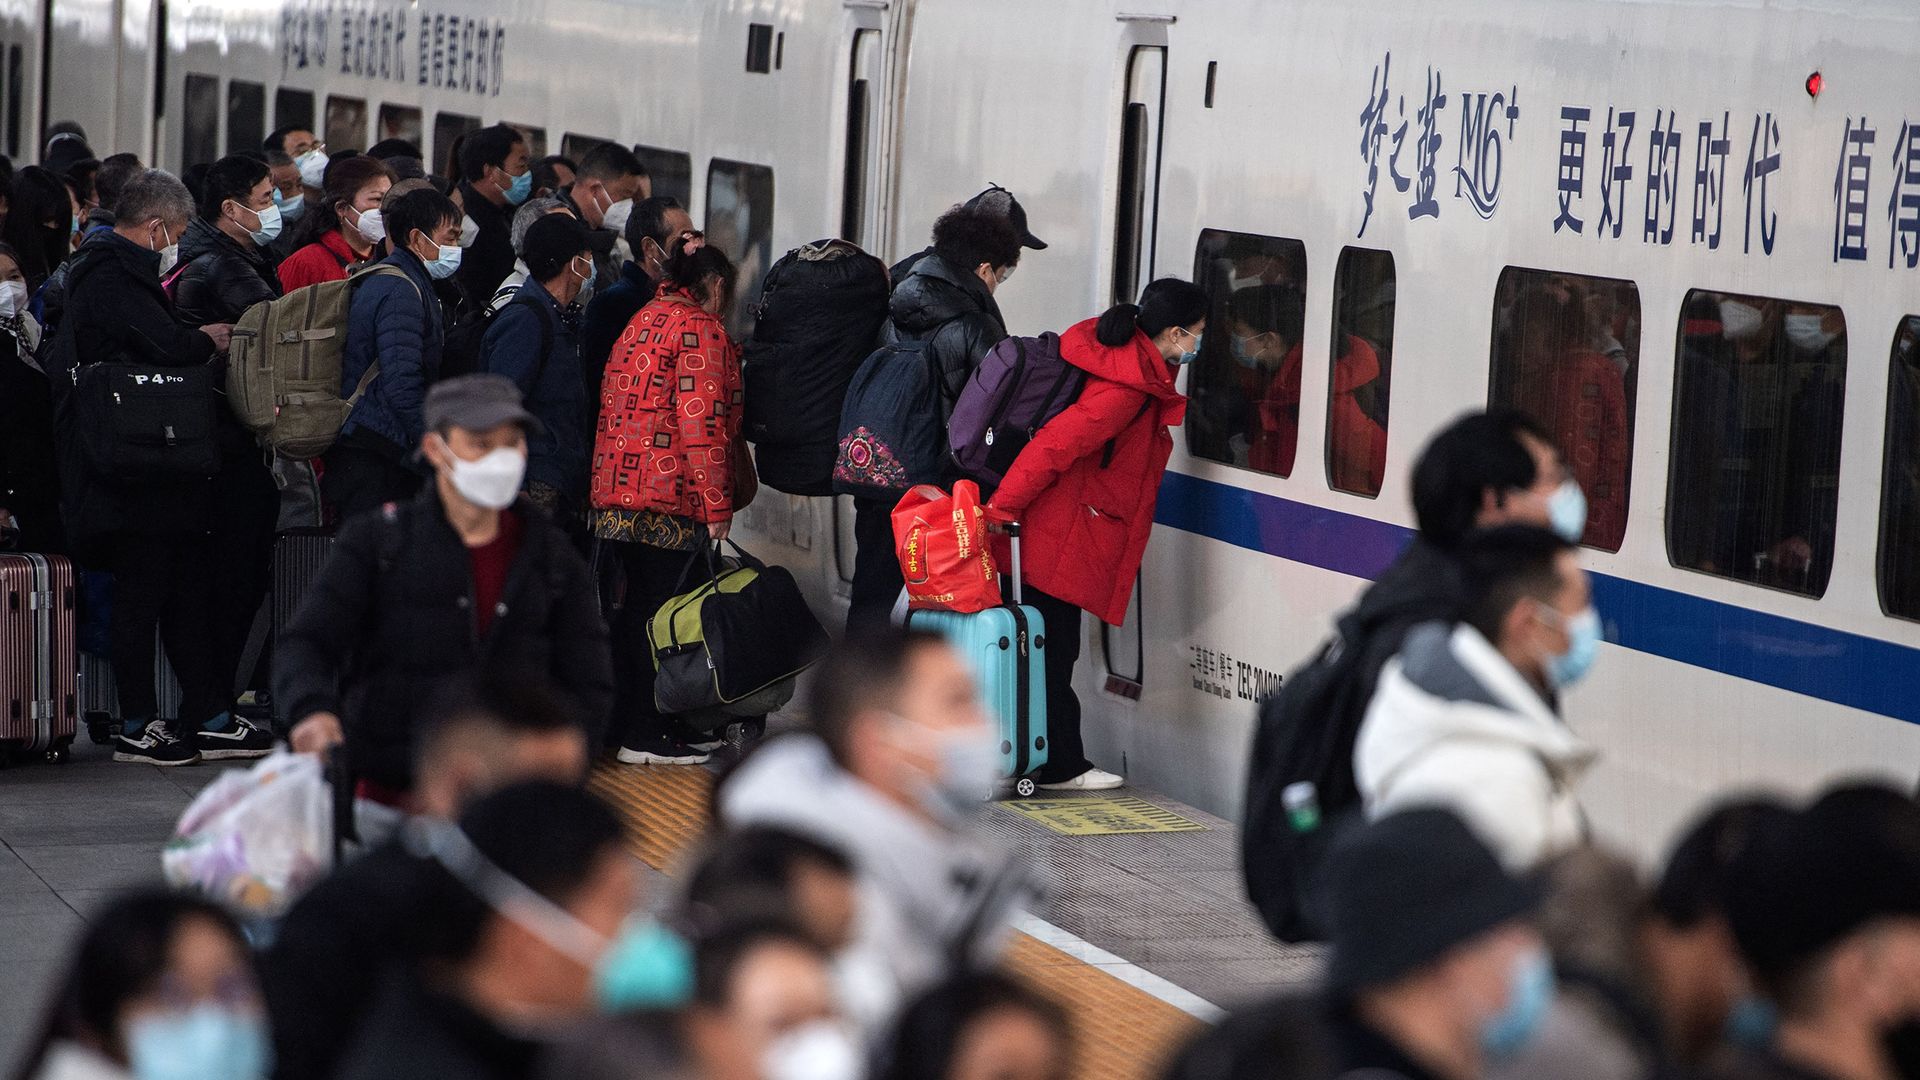  passengers preparing to board their train at Hankou railway station on the first day of peak travel ahead of the Lunar New Year of the Rabbit in Wuhan, in China's central Hubei province. 